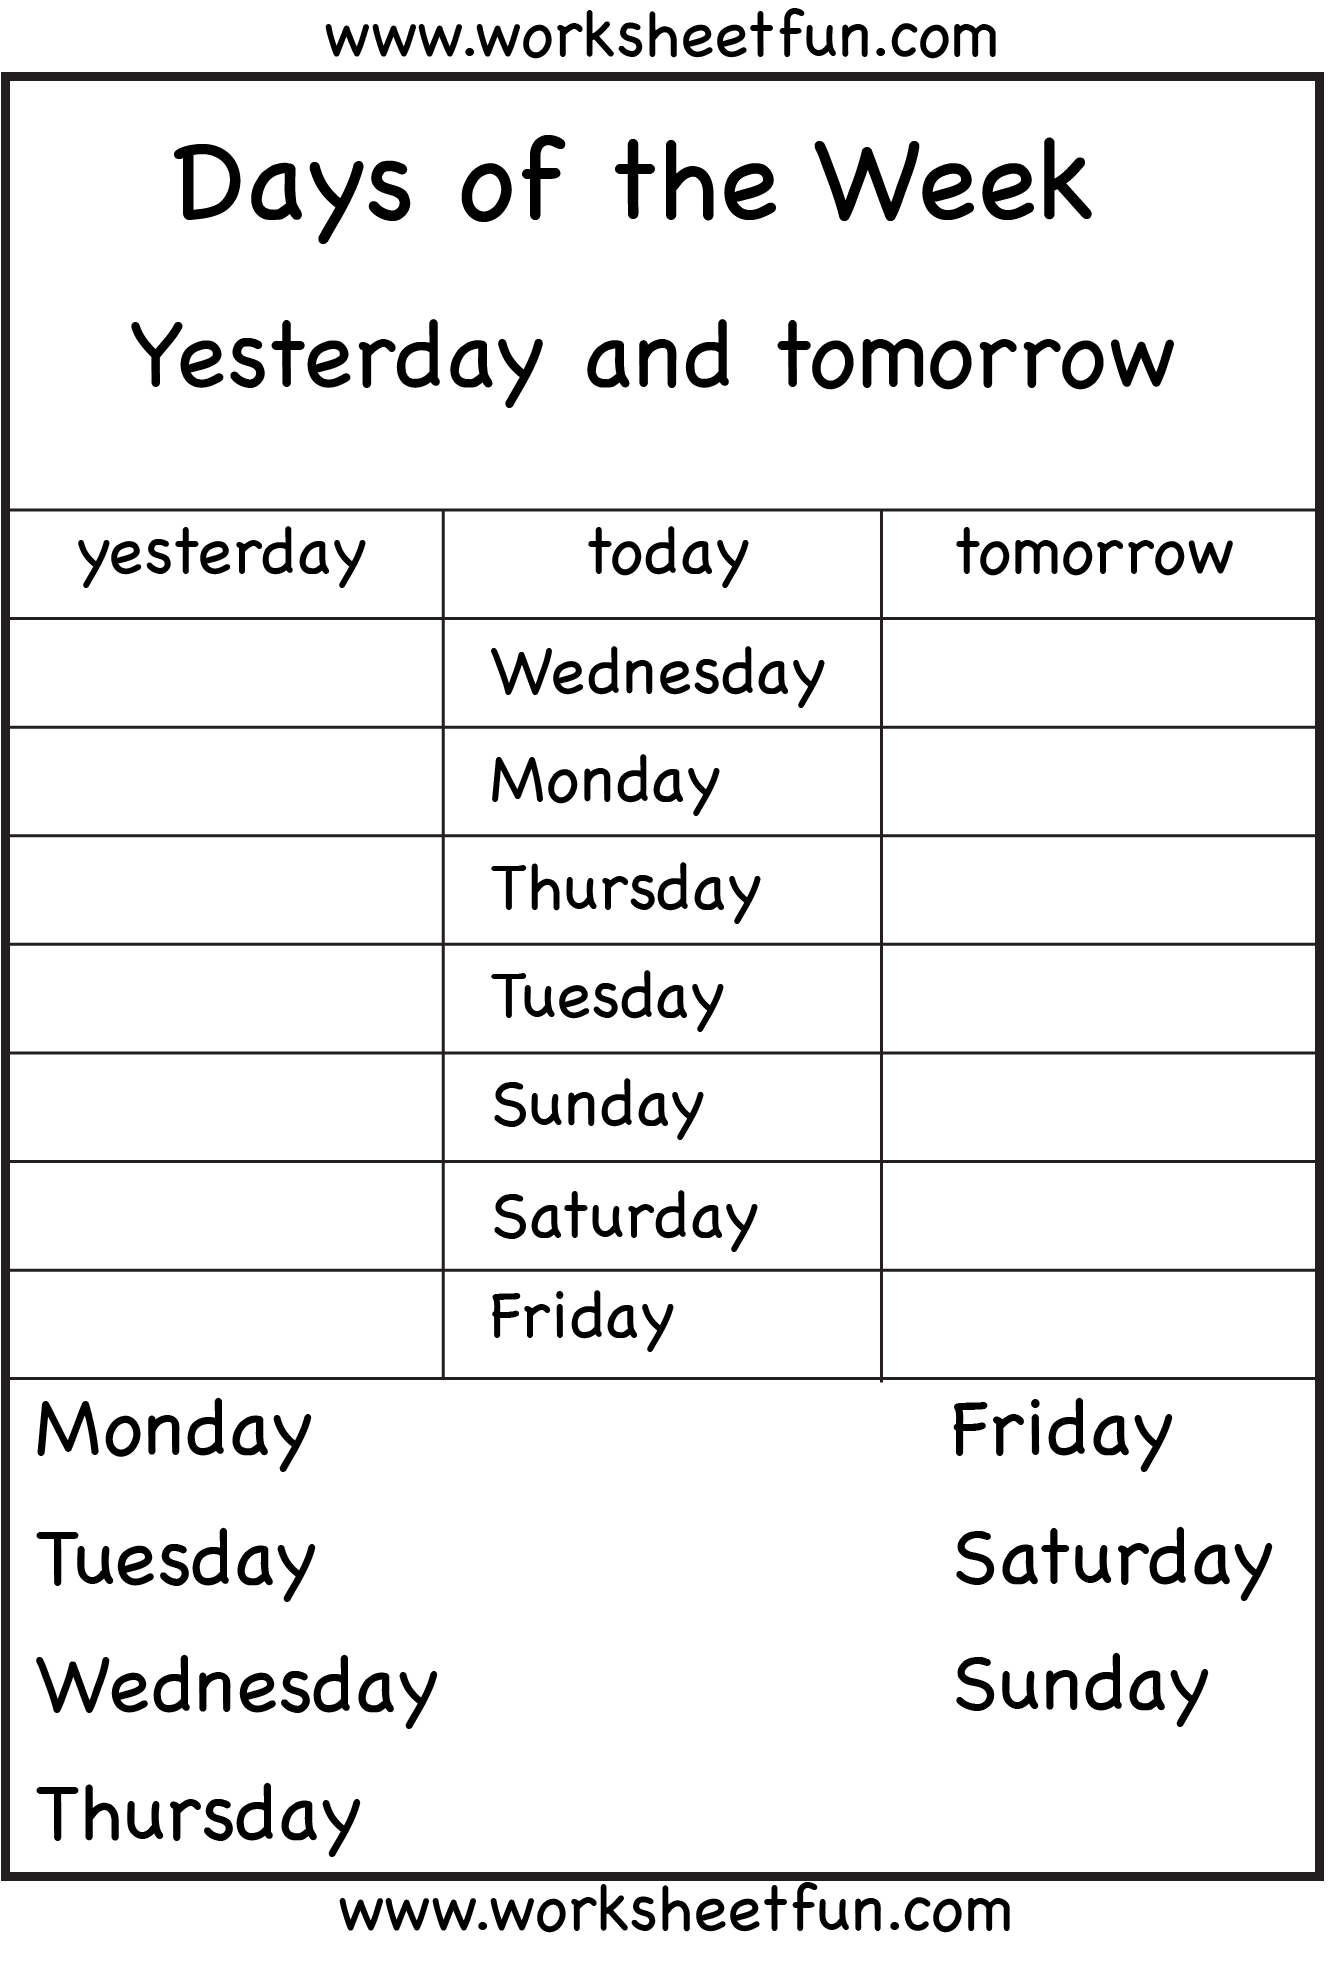 Days Of The Week 1 Worksheet School Worksheets English Lessons For